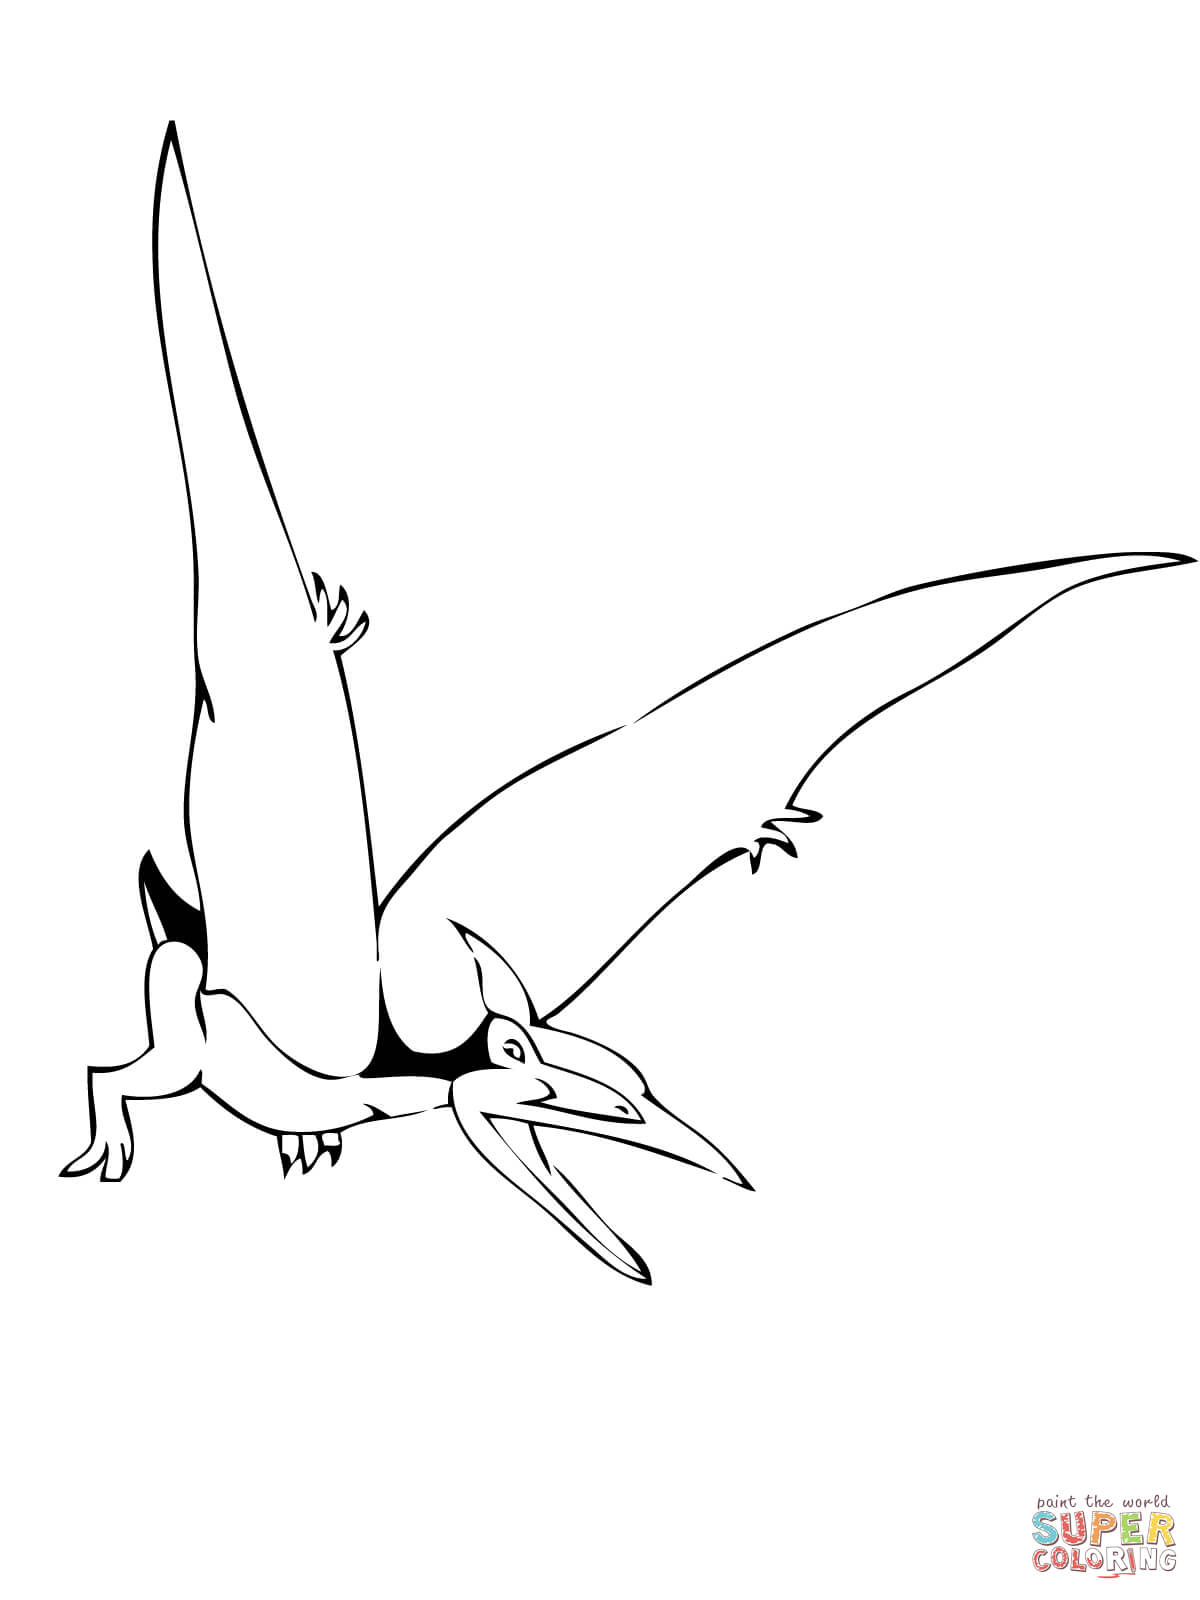 Pteranodon coloring page free printable coloring pages